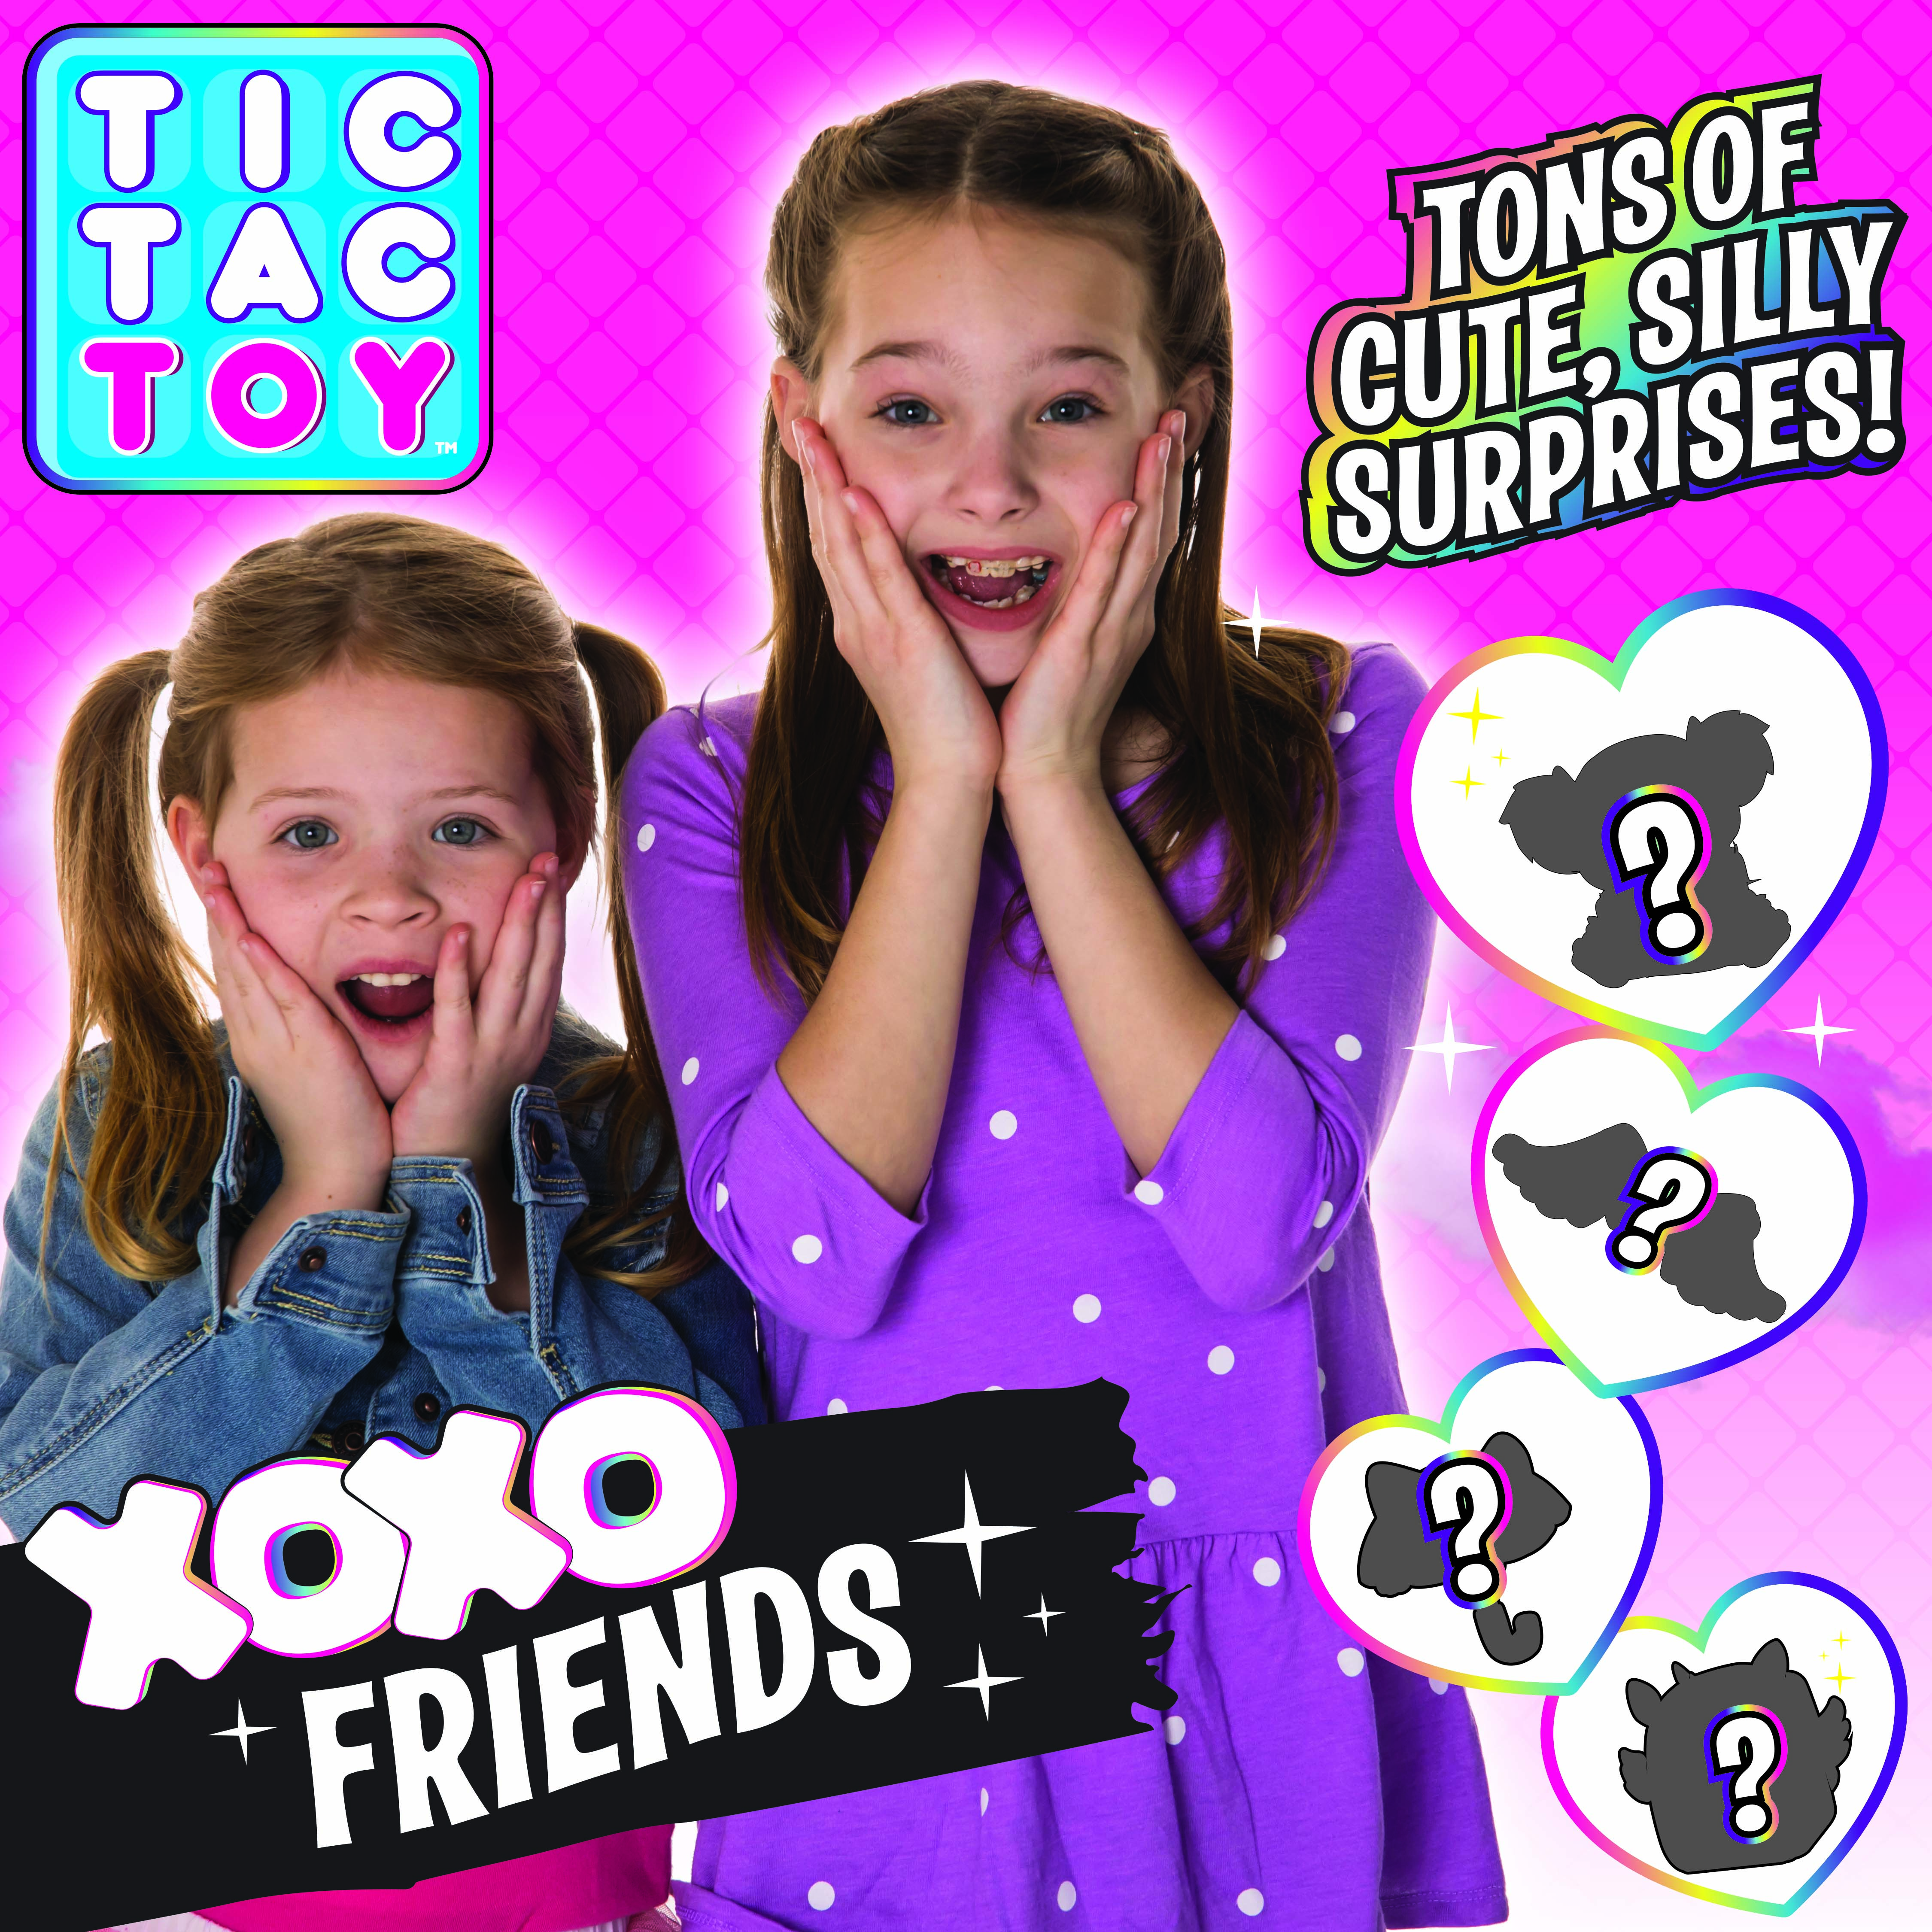 Famous YouTube family Tic Tac Toy Launches New Toy Line at Walmart and